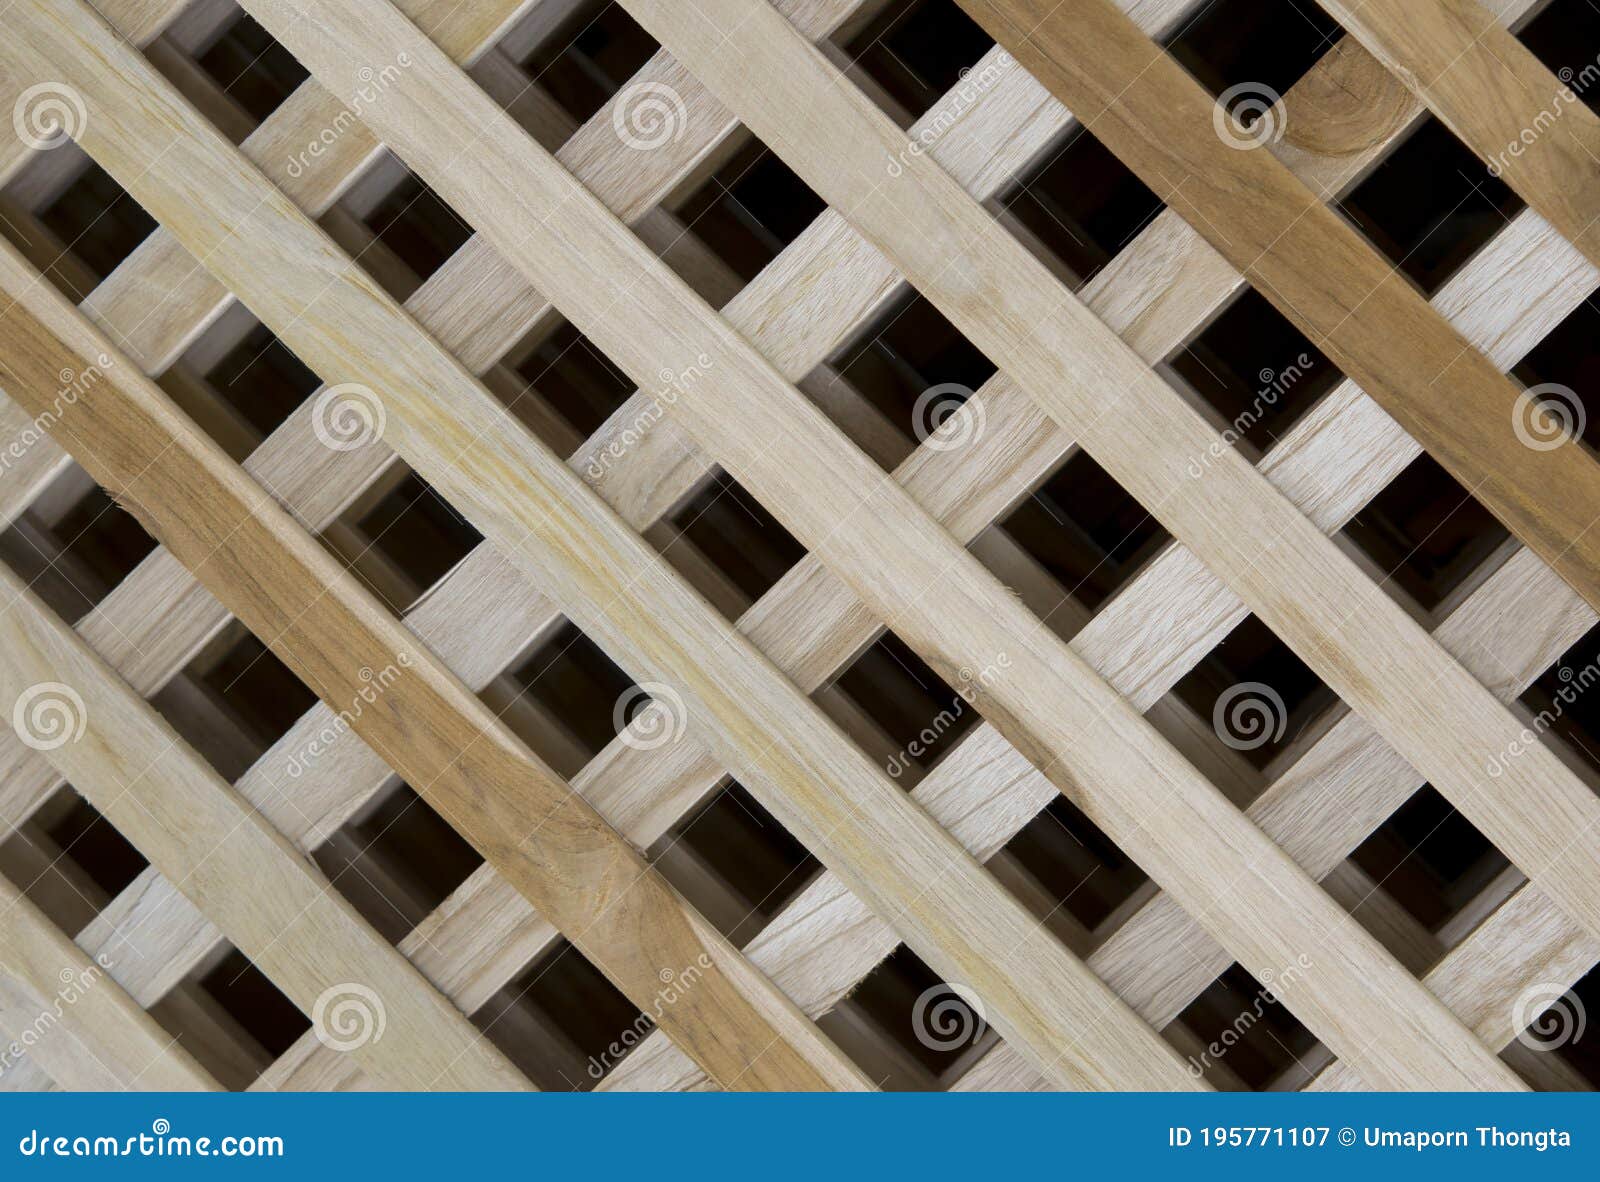 trough disinfectant Email Close-up of Wooden Handcraft Texture Background with Diagonal Square Grid  for Decoration on the Wall or Partition Stock Image - Image of detail,  decoration: 195771107